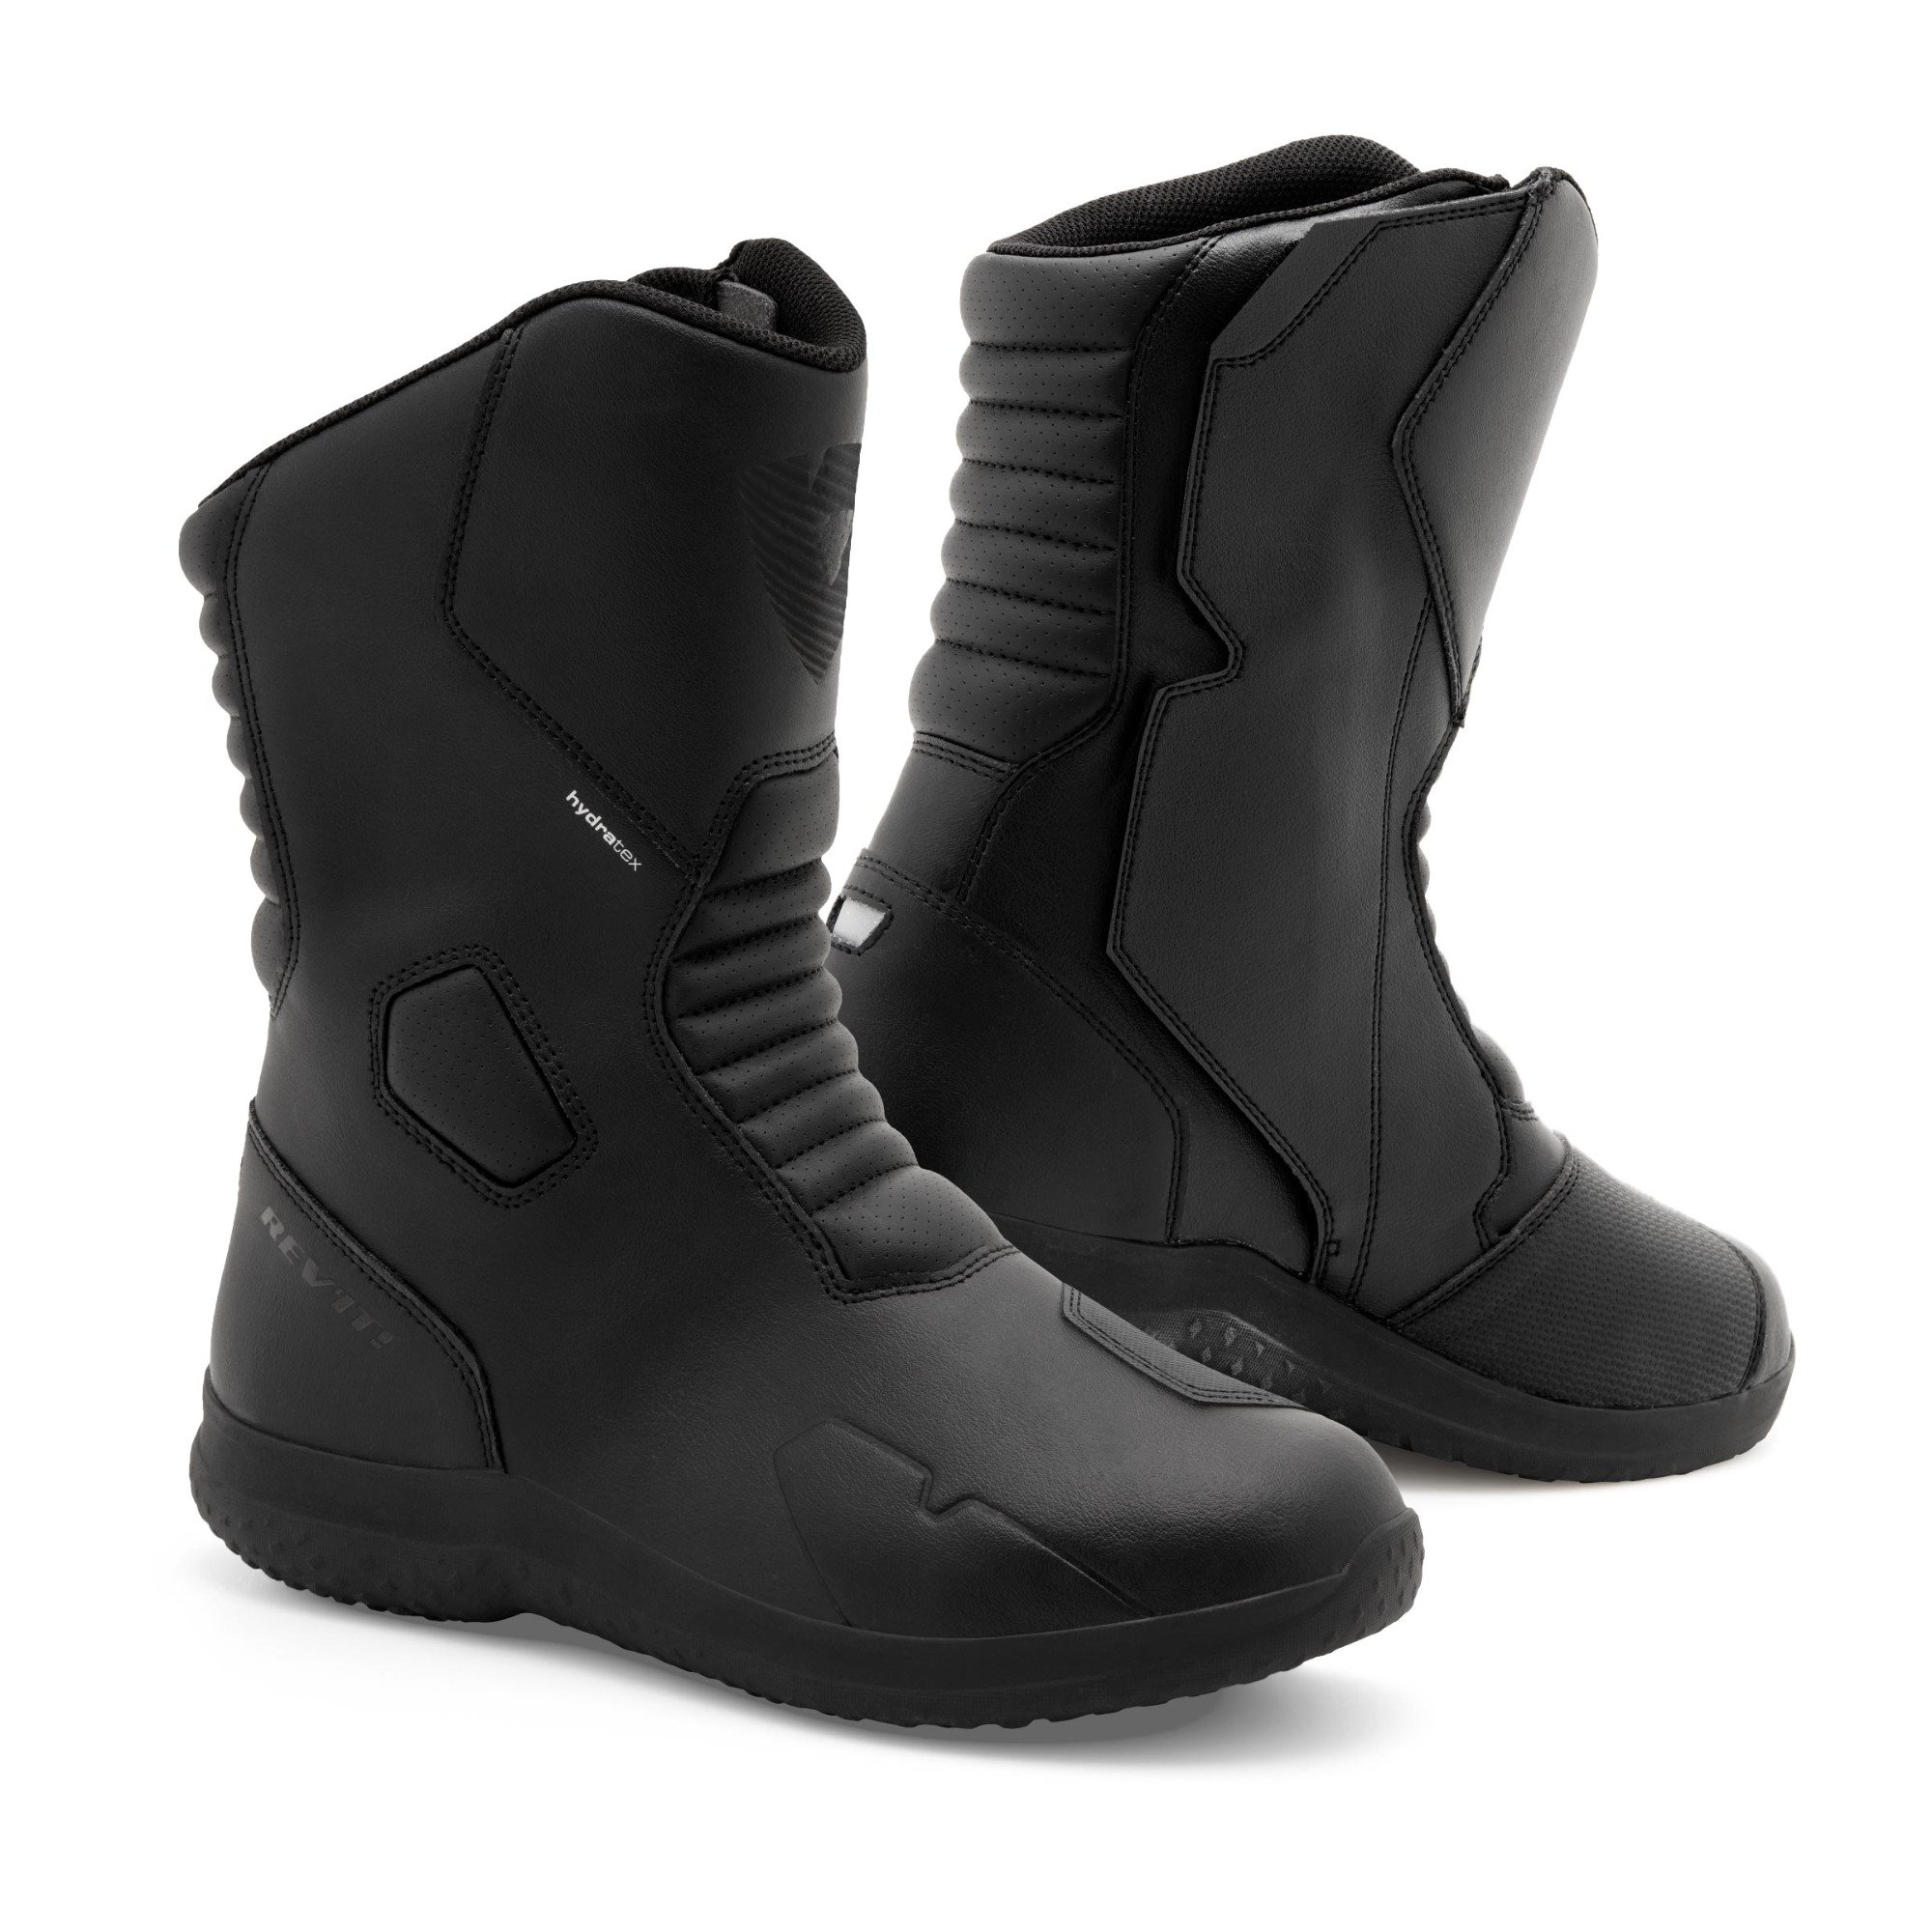 Image of REV'IT! Boots Flux H2O Black Size 38 ID 8700001330473